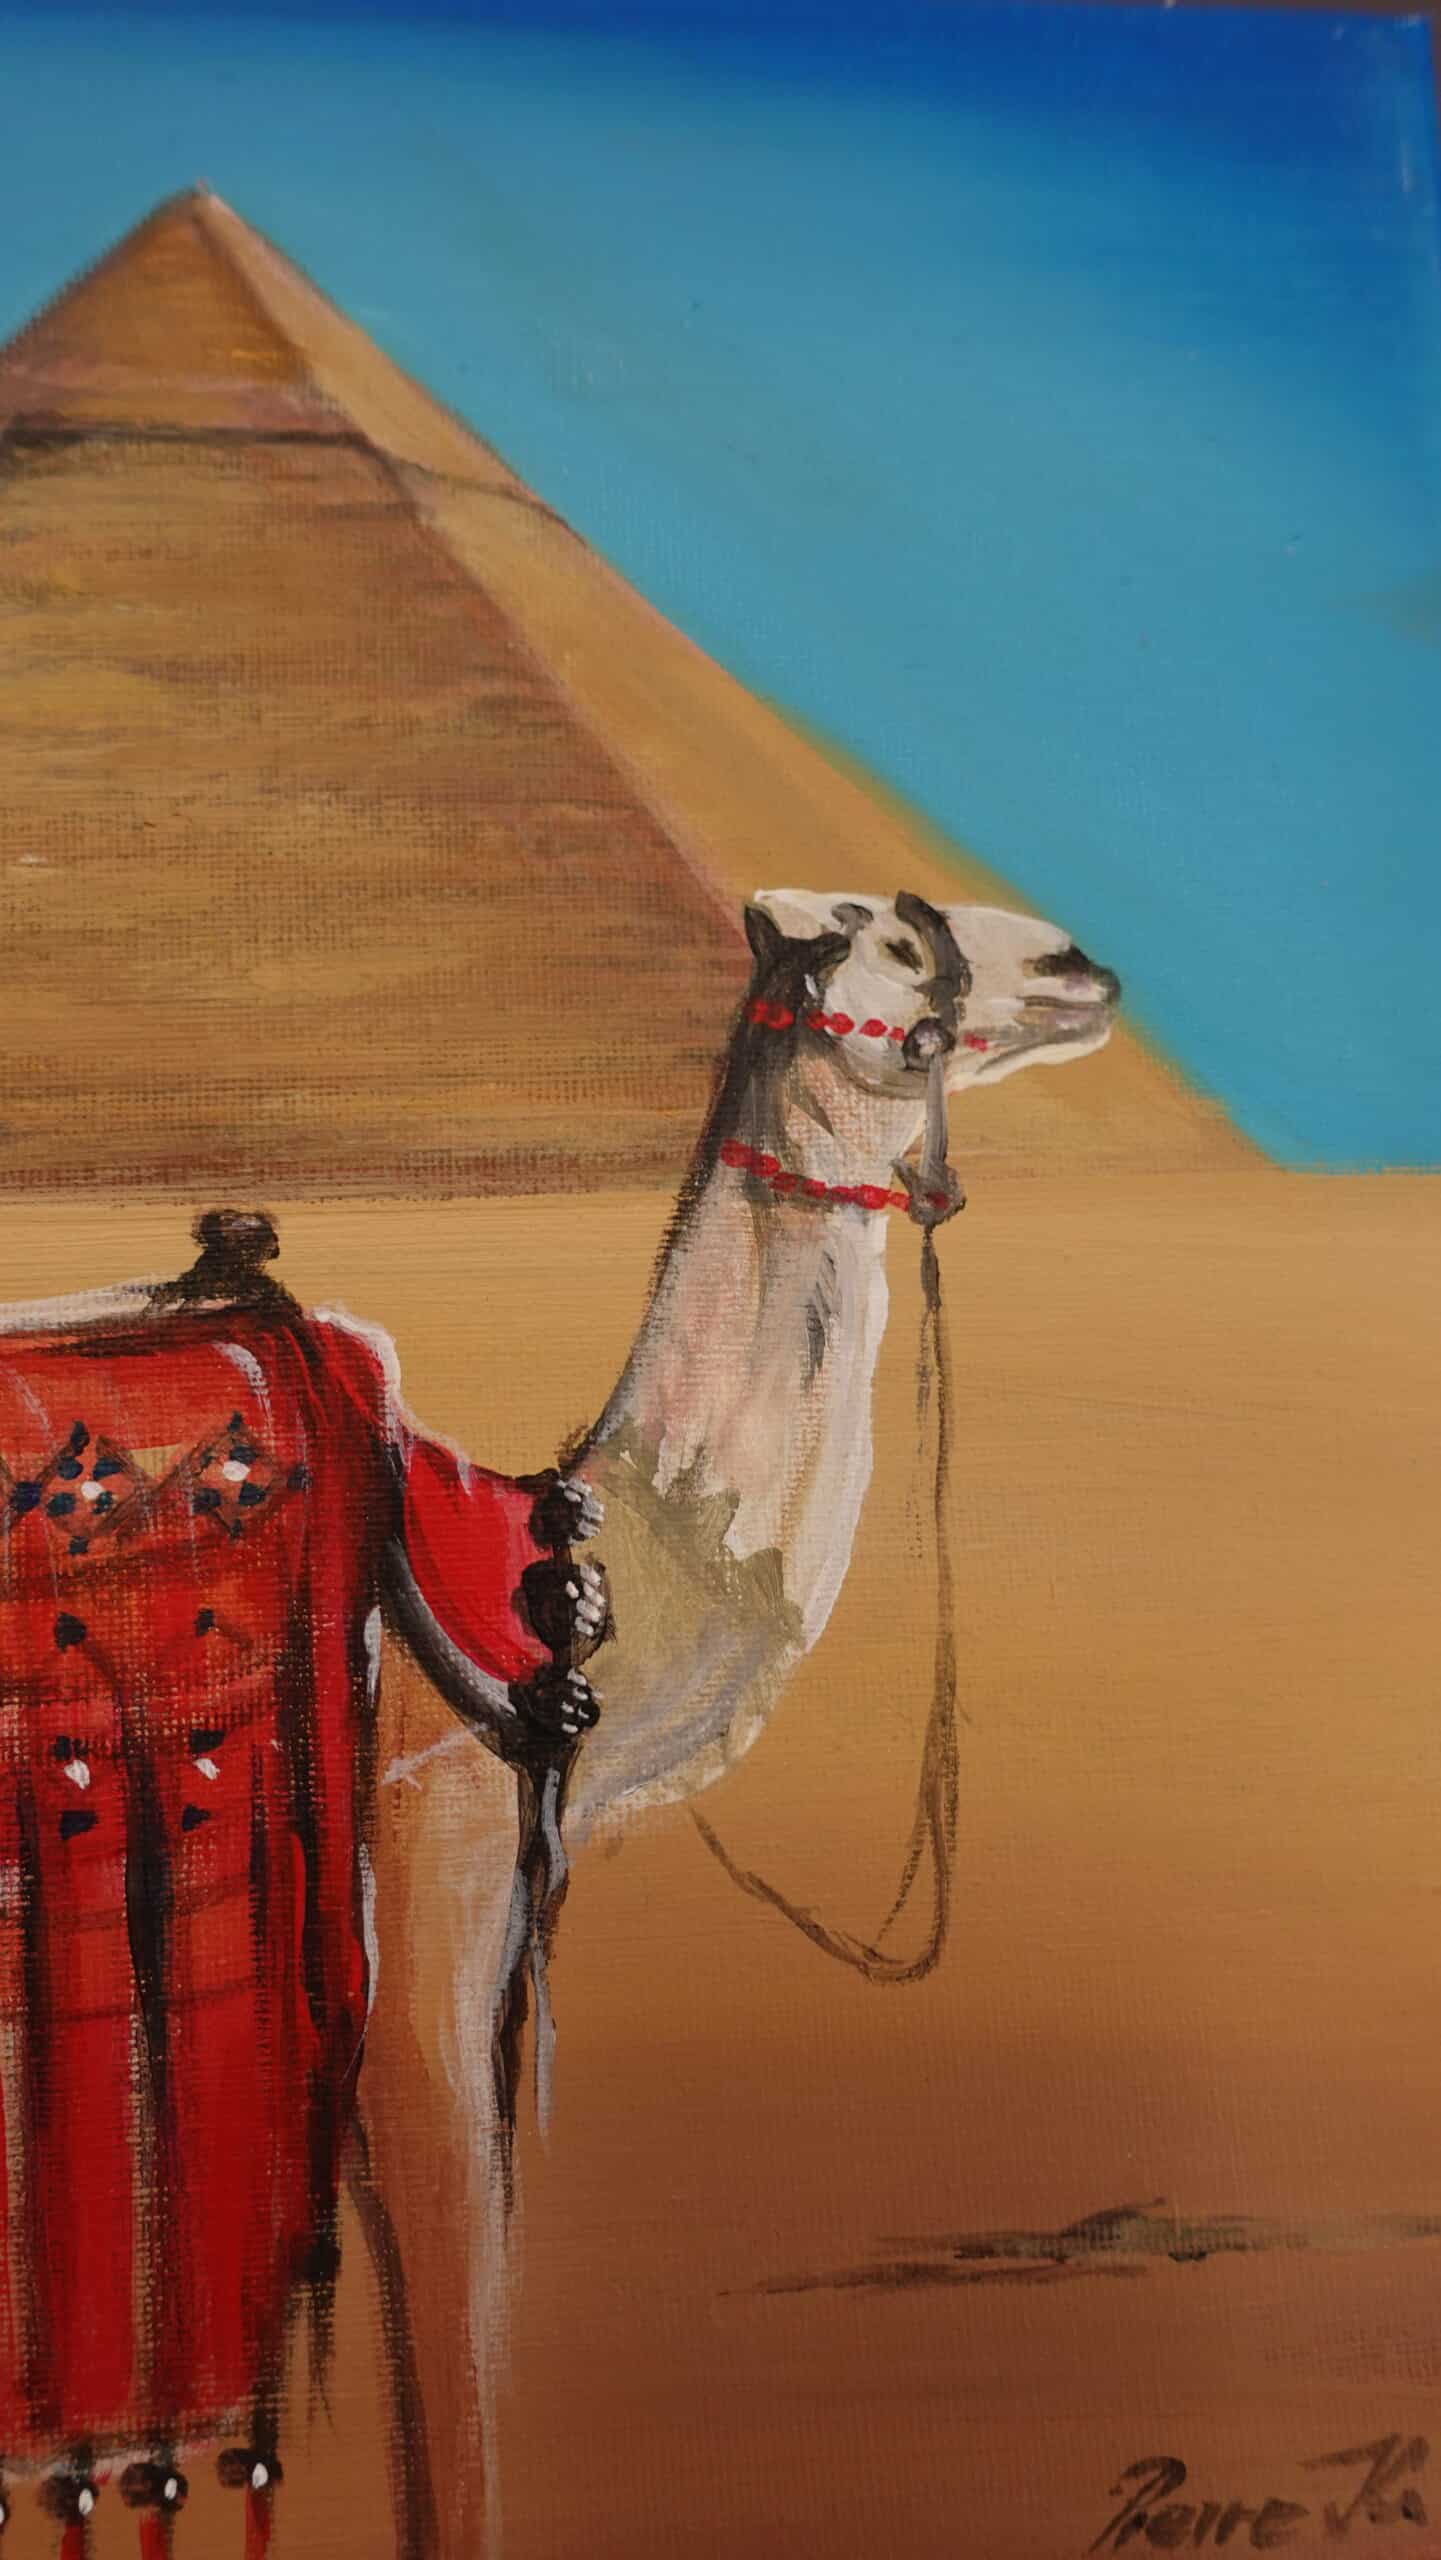 Two camels in the desert 30 x 40 cm